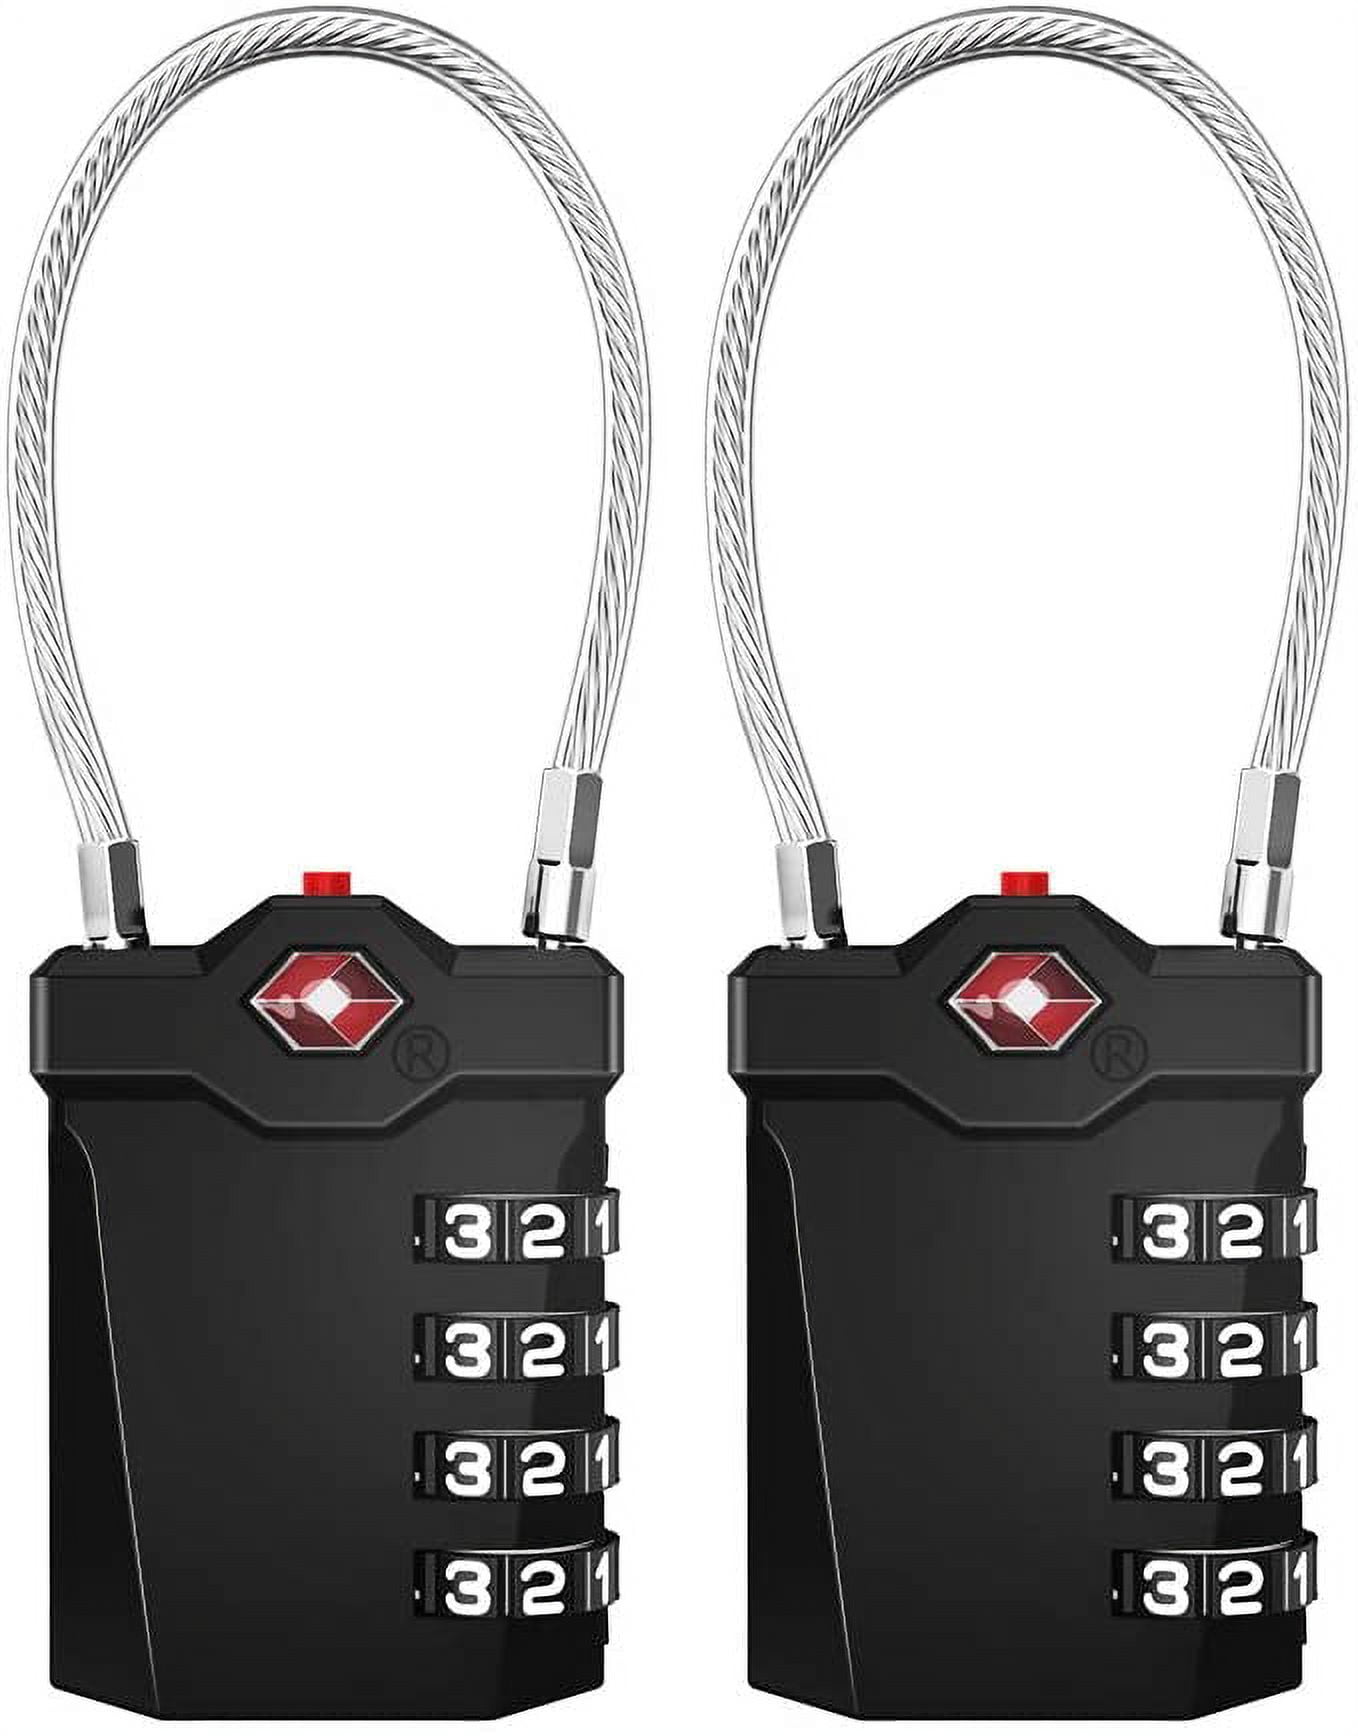 Heldig Luggage Lock, 4 Digit Combination Lock with Open Alarm, Cable Lock  for Gym Locker (2 Pieces, Black)B 